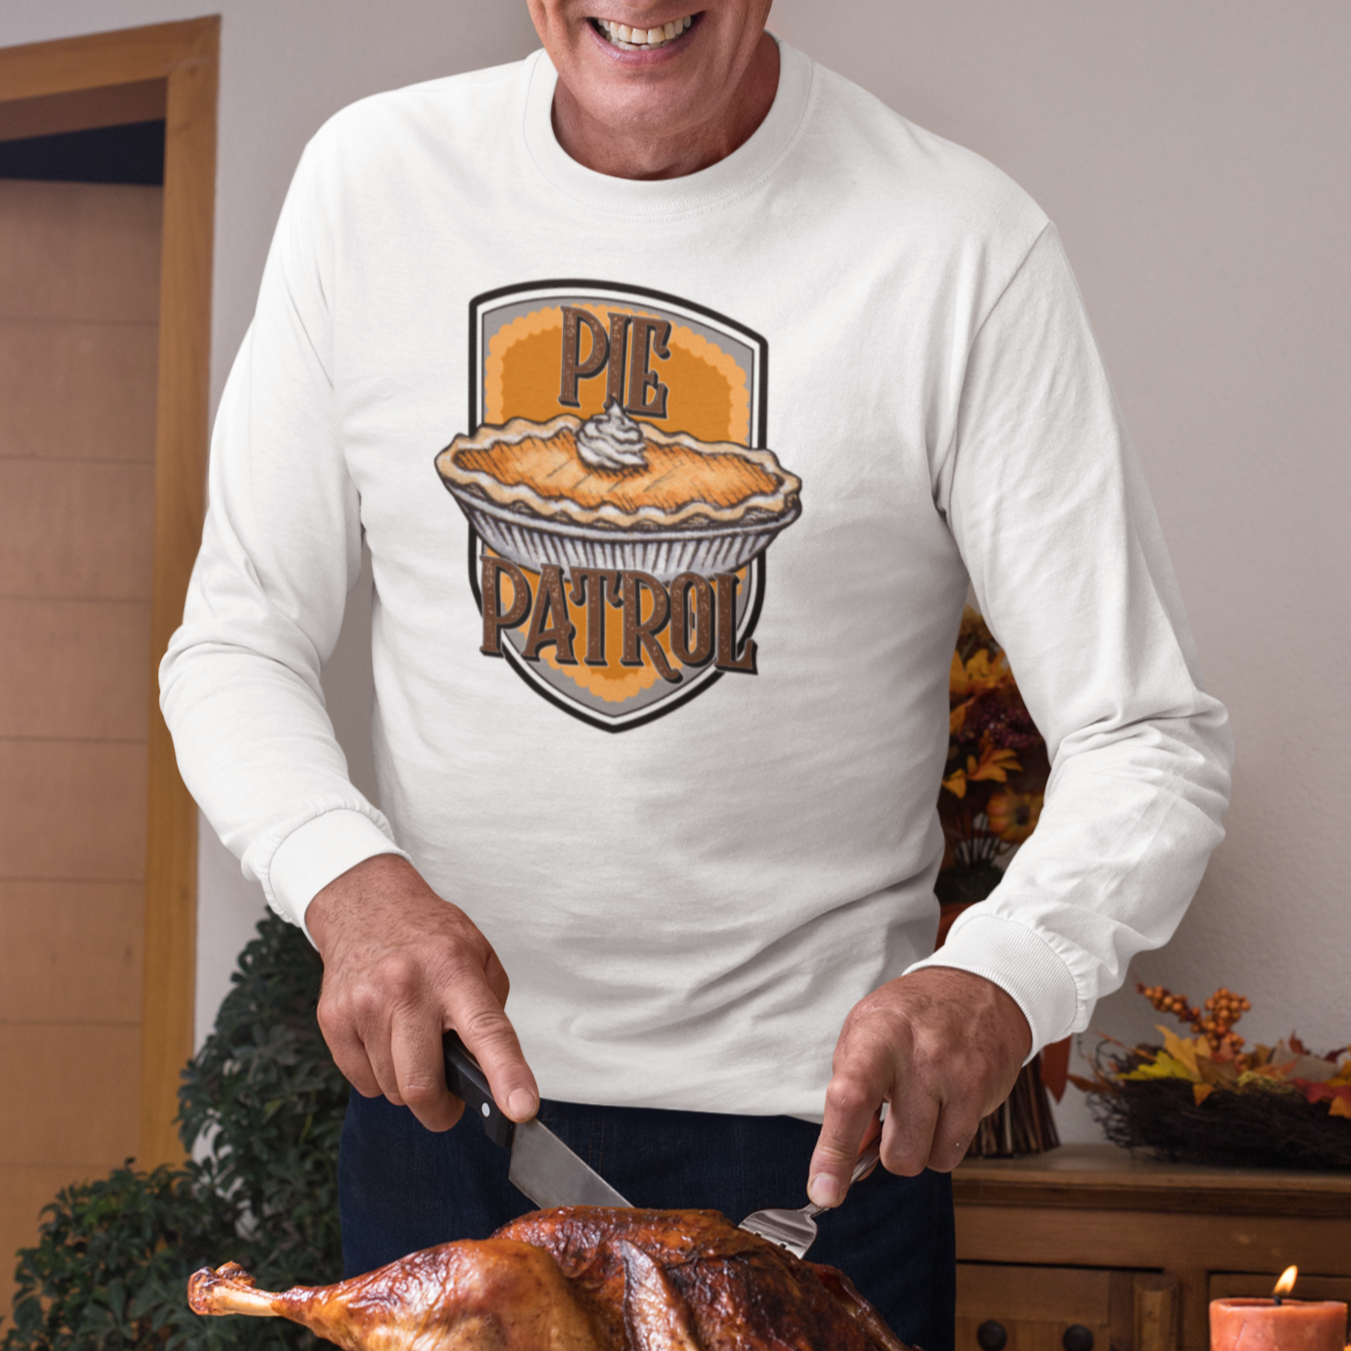 Smiling man wearing a long sleeve T-shirt with a pumpkin pie and the words "Pie Patrol" on the chest, while he's carving a turkey for Thanksgiving dinner.